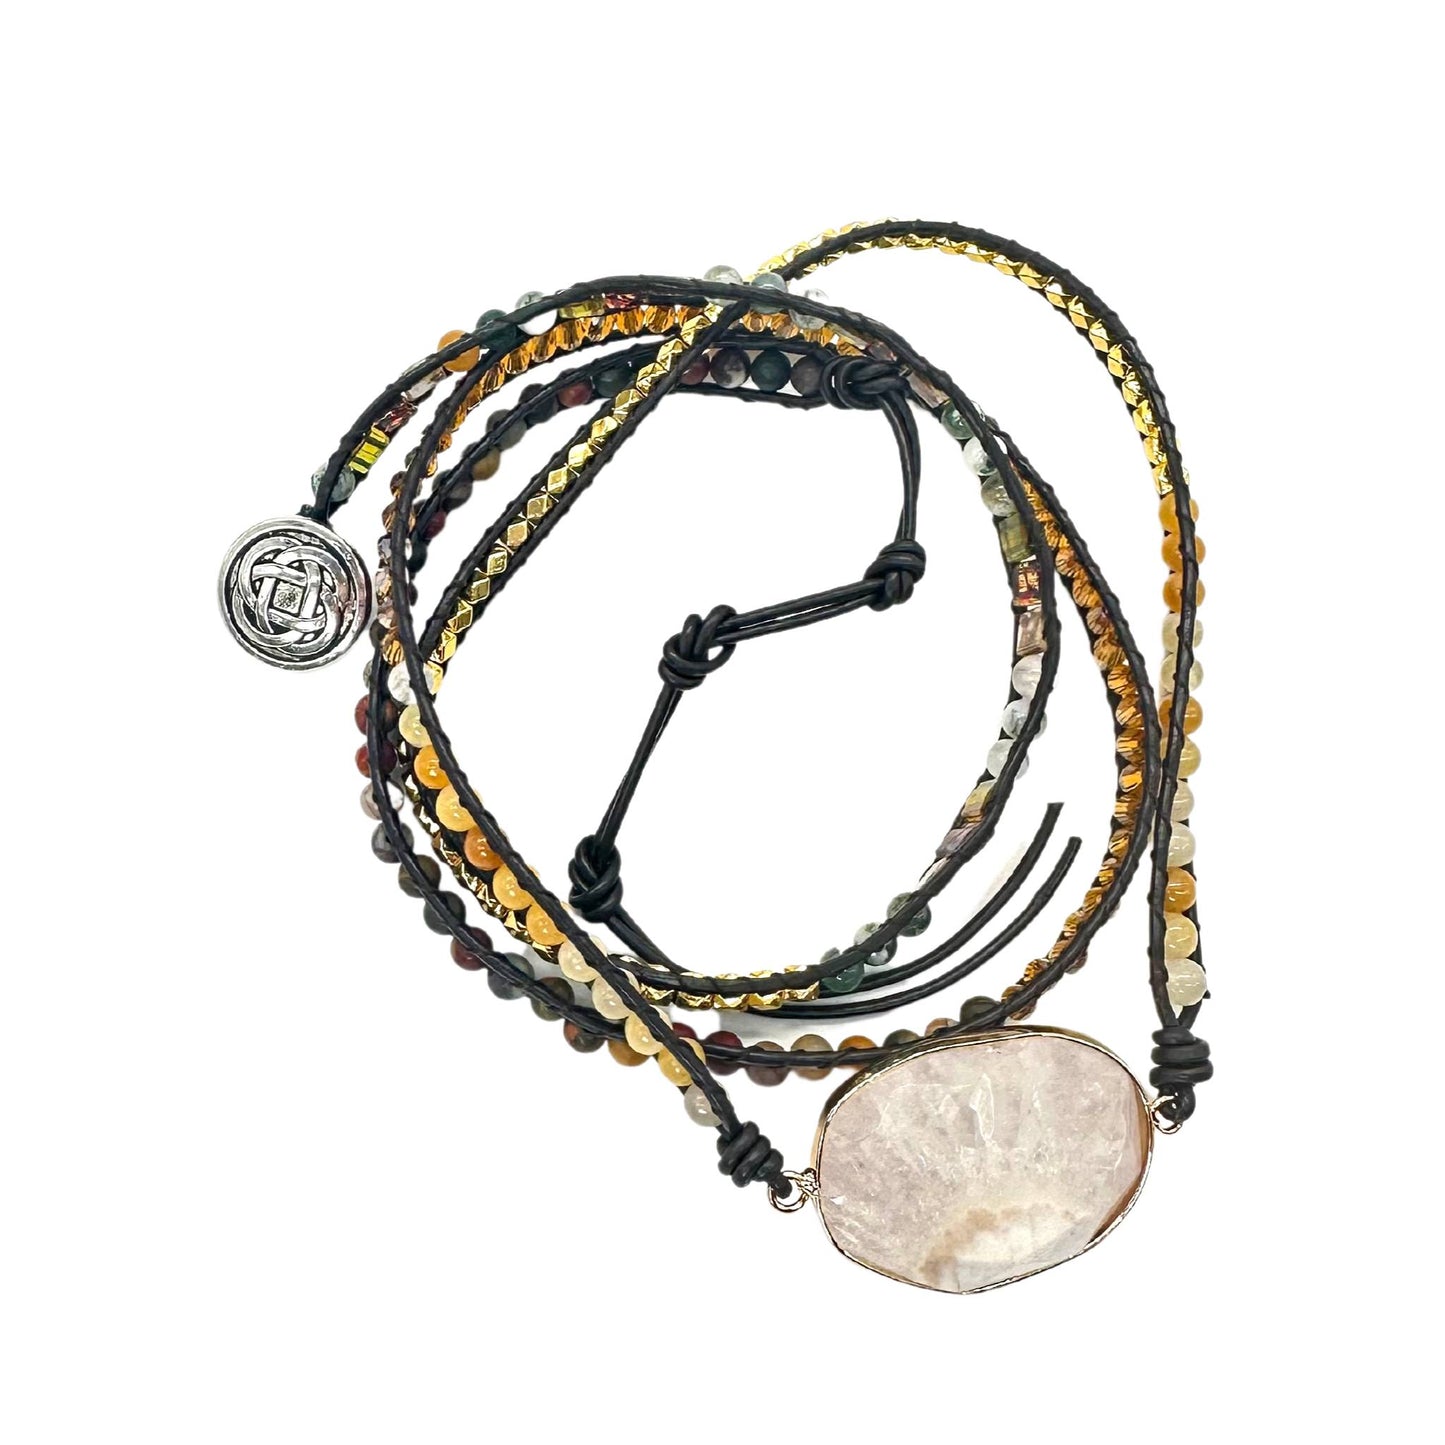 A brown, tan, yellow and white wrap bracelet on a white background